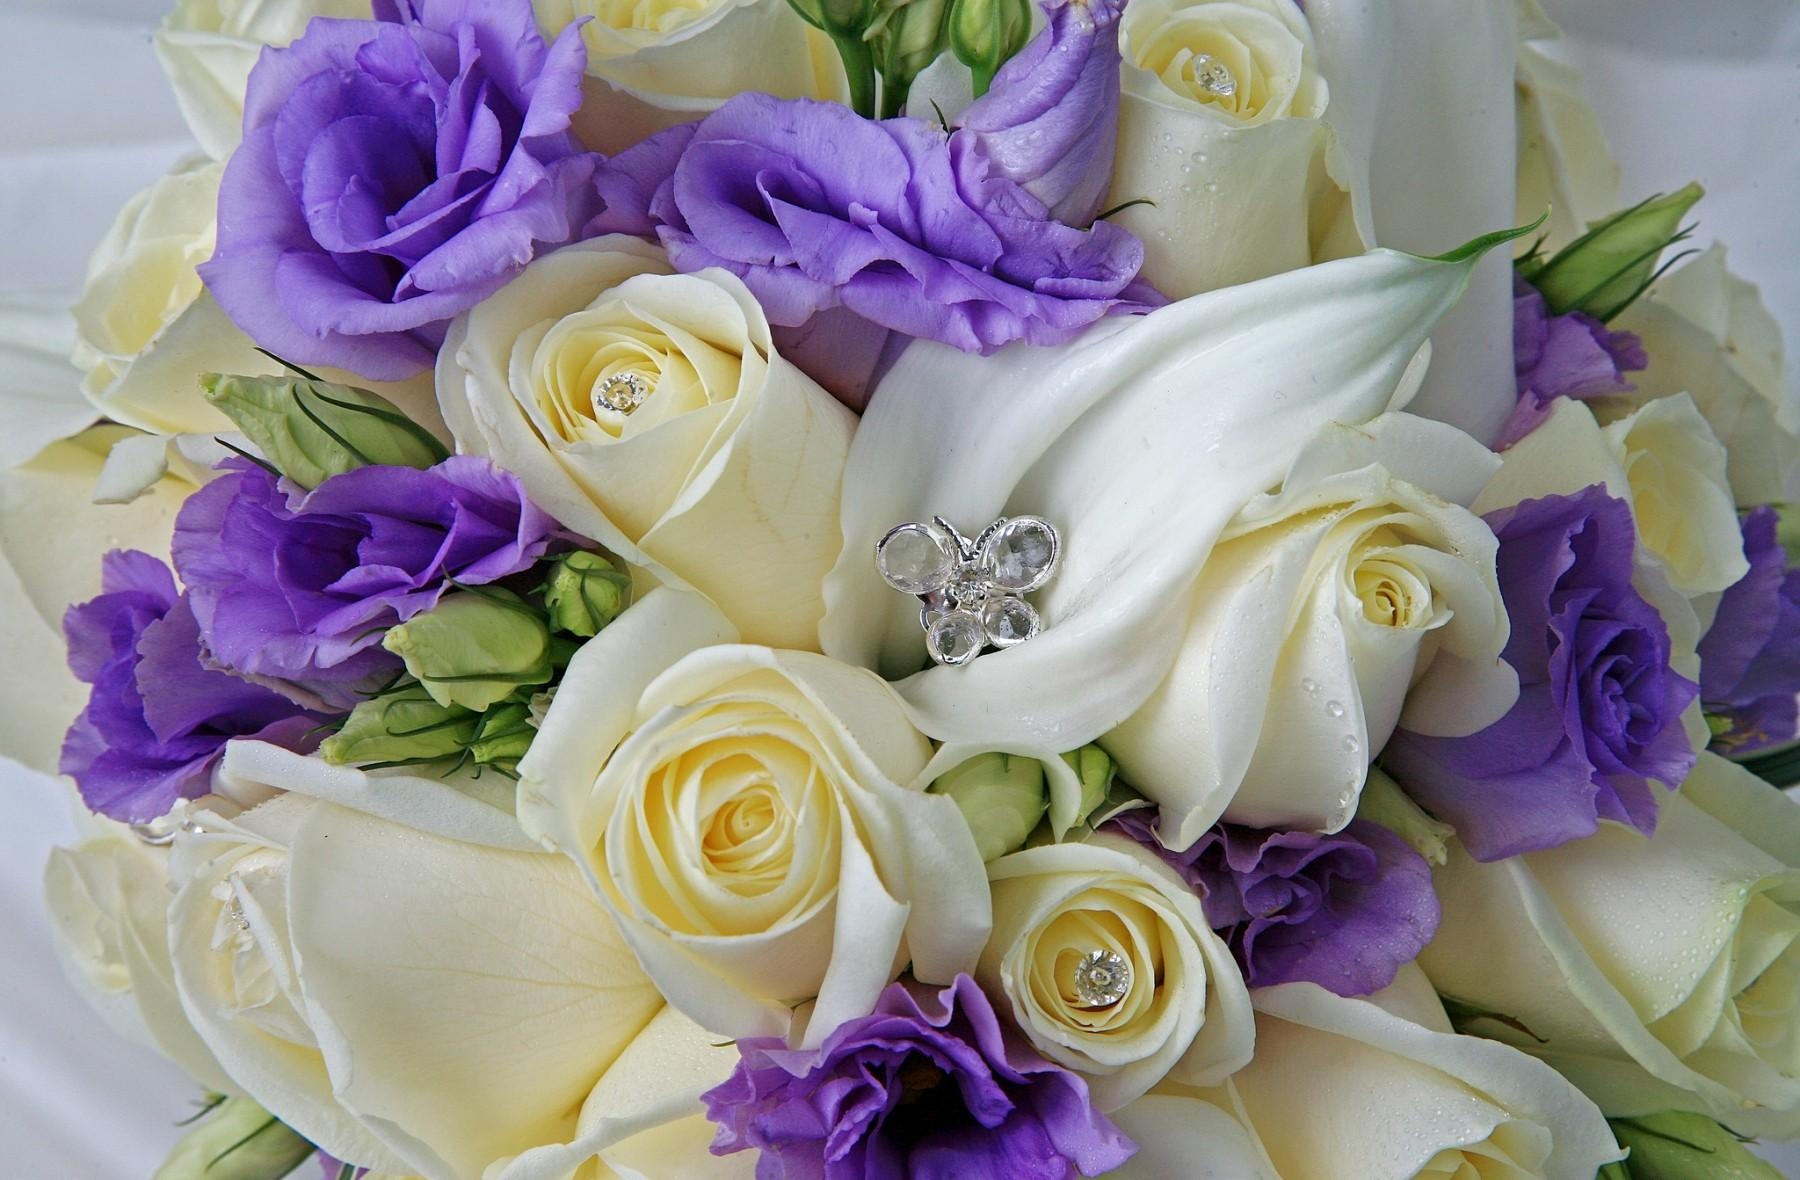 drops, roses, flowers, decorations, bouquet, lisianthus russell, lisiantus russell cellphone